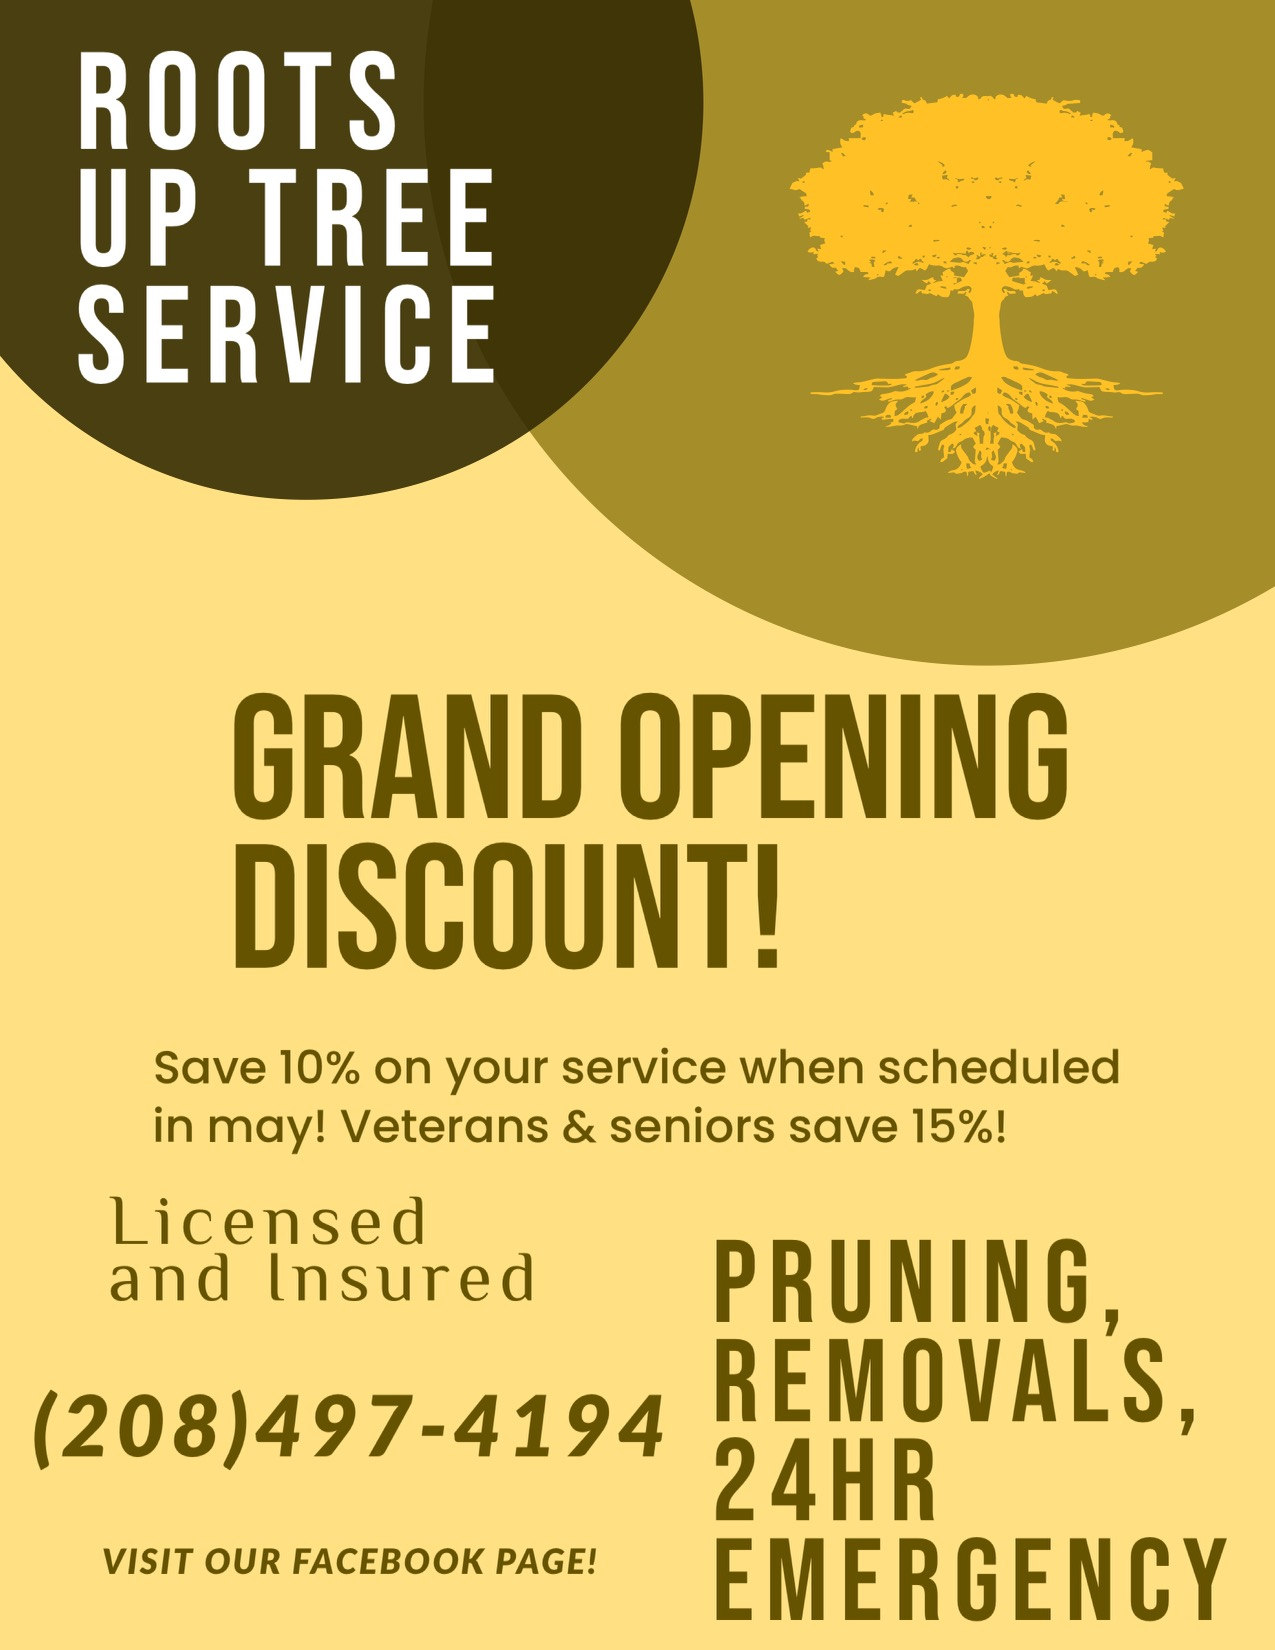 GRAND OPENING DISCOUNT ALL AROUND  GRAND OPENING DISCOUNT ALL AROUND TREE SERVICE PRUNING REMOVALS 24/hr EMERGENCY Save 10% on your service when scheduled in May Veterans/Seniors Save 15% Call Zack TODAY! 208-497-4194 New & Locally Owned Business Licensed & Insured